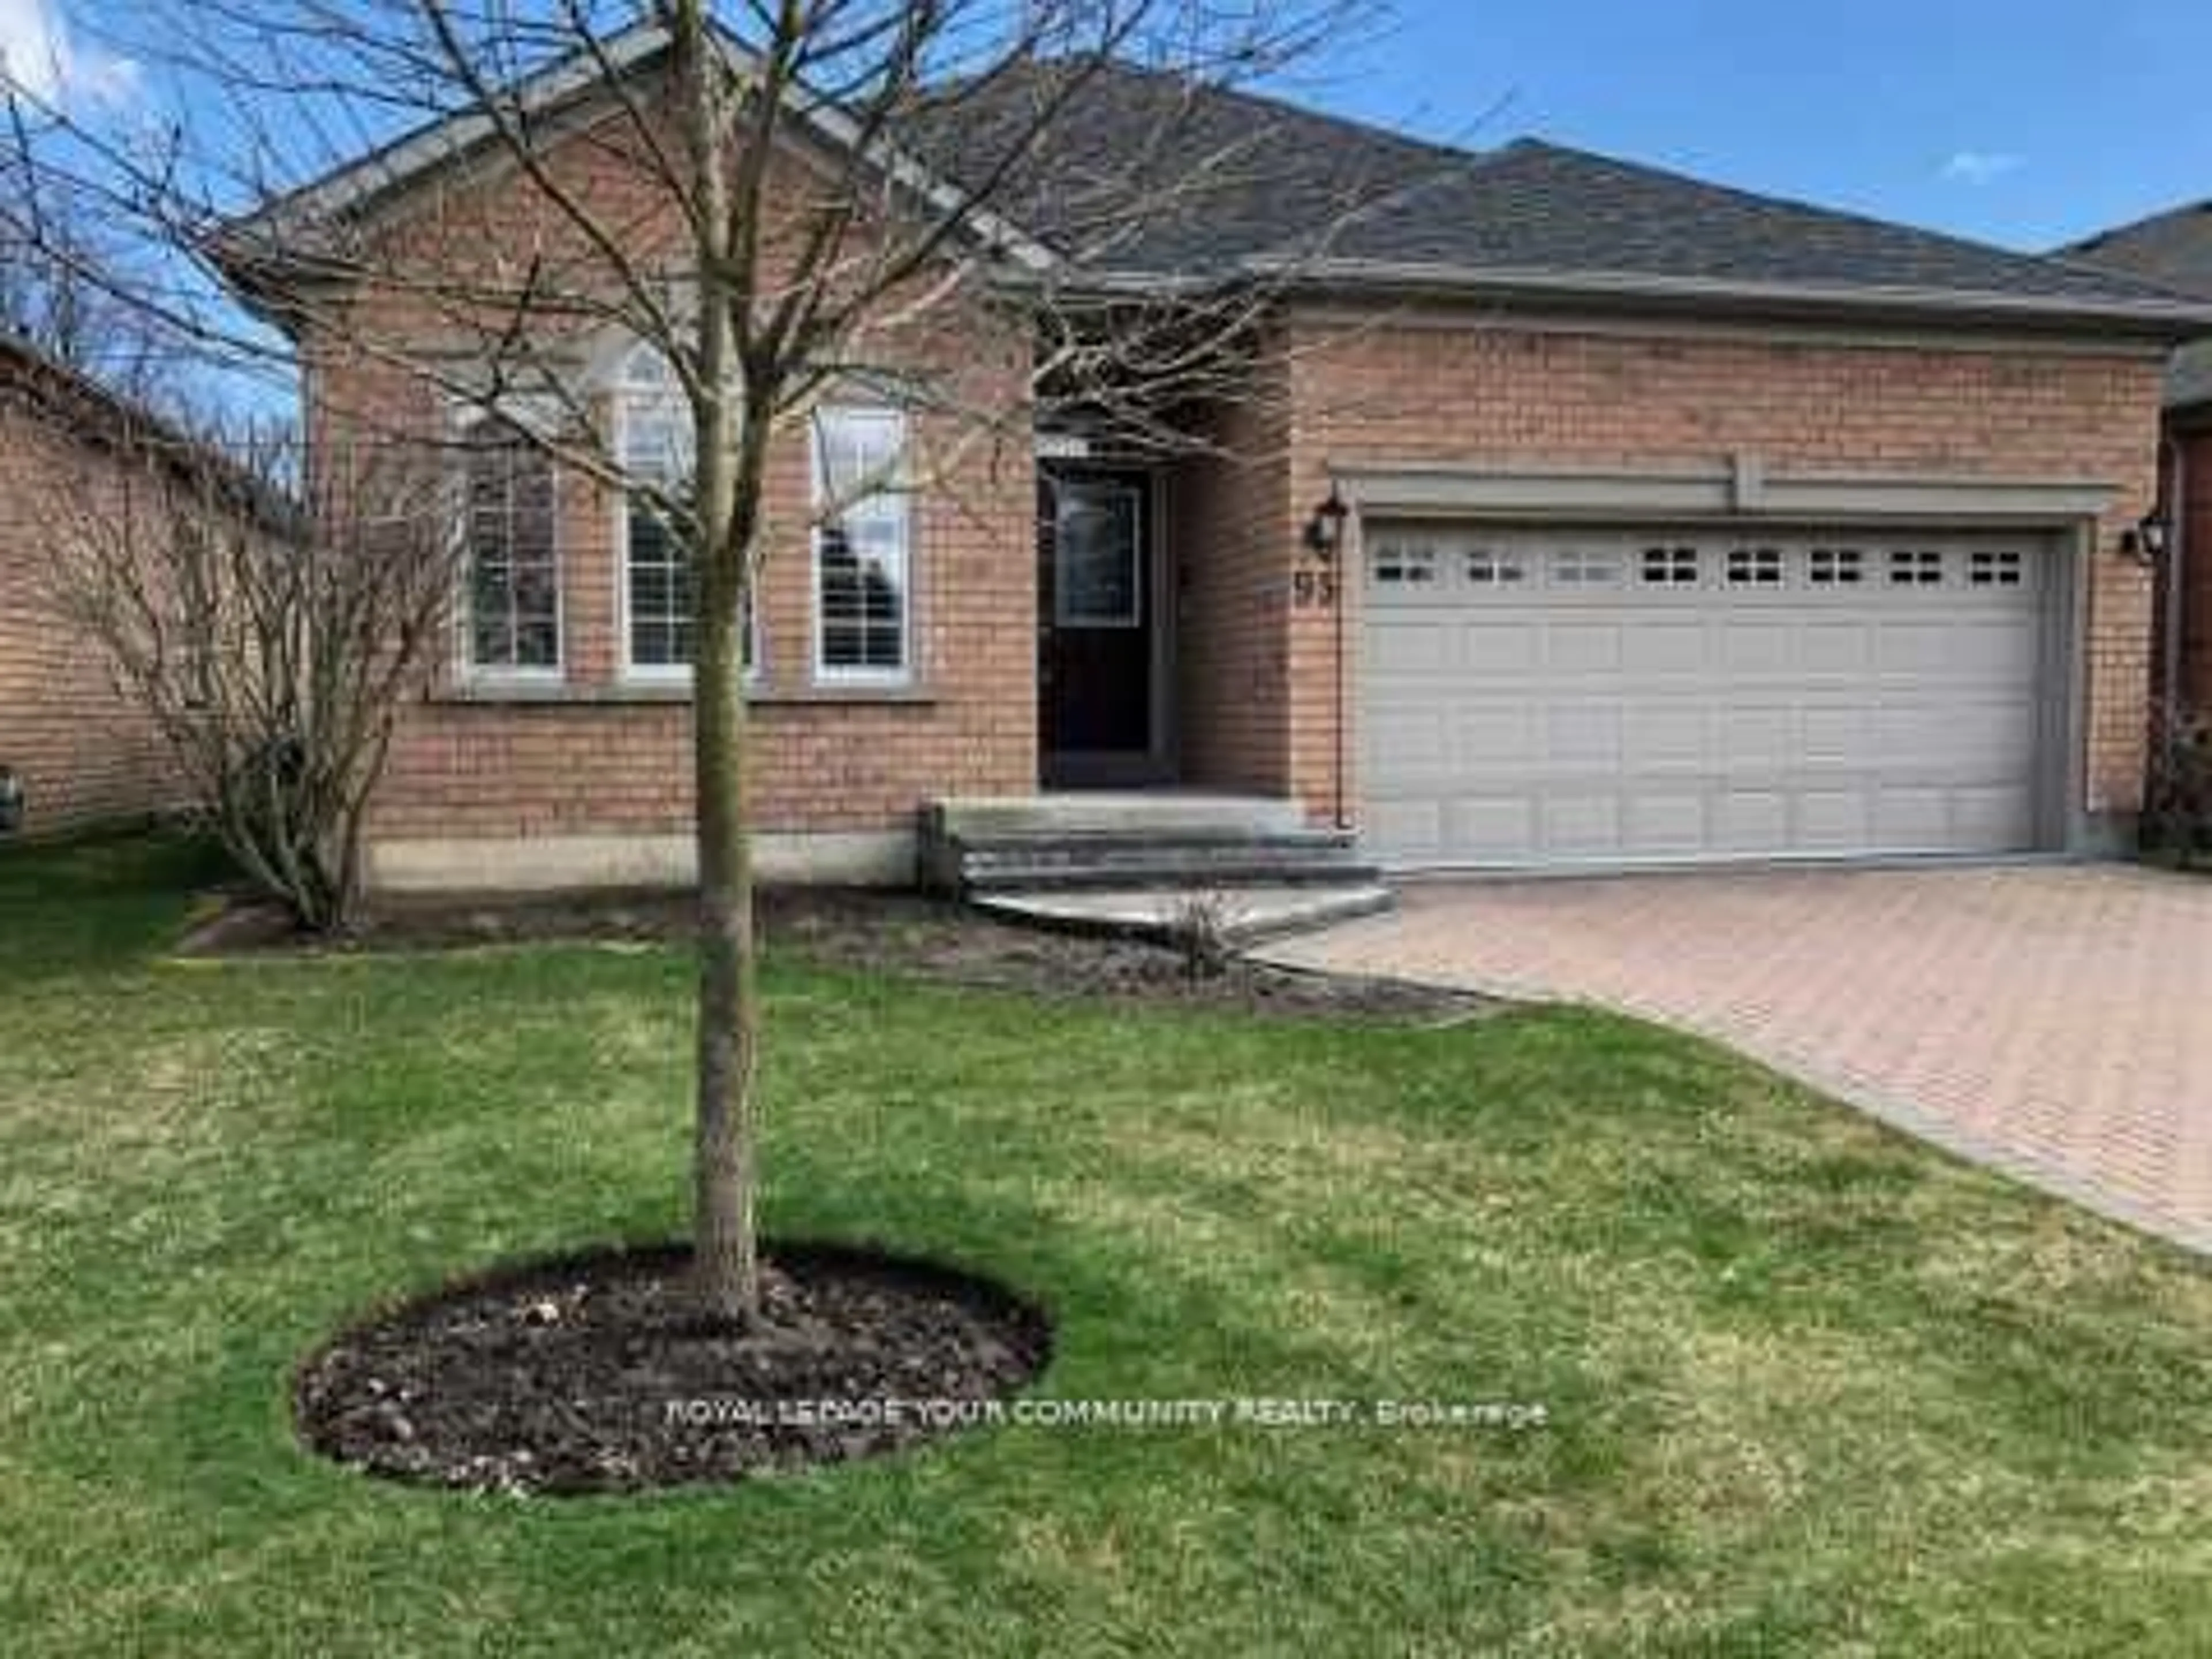 Home with brick exterior material for 95 Bobby Locke Lane, Whitchurch-Stouffville Ontario L4A 1R5